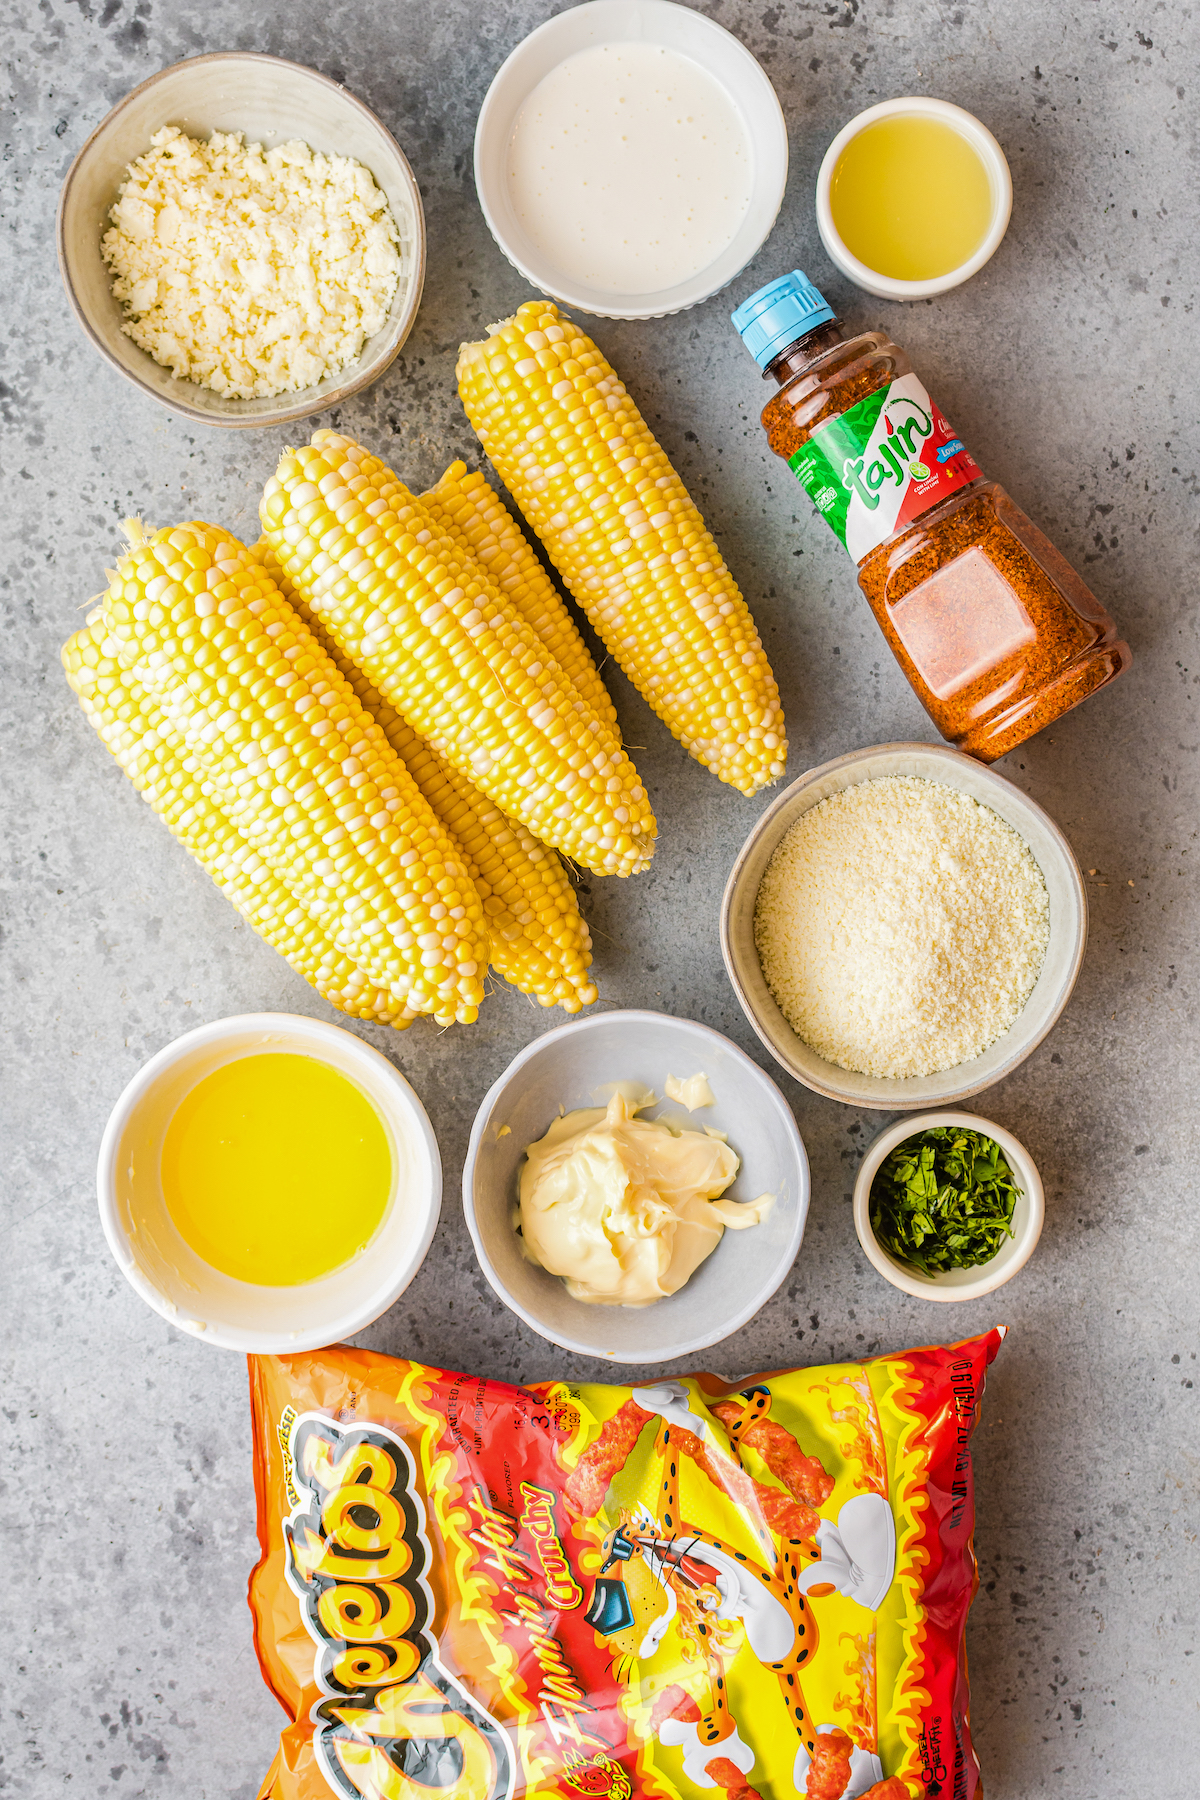 From top left: Cotija crumbles, crema, lime juice, fresh corn on the cob, tajin seasoning, melted butter, queso fresco, cilantro, mayonnaise, and hot Cheetos.